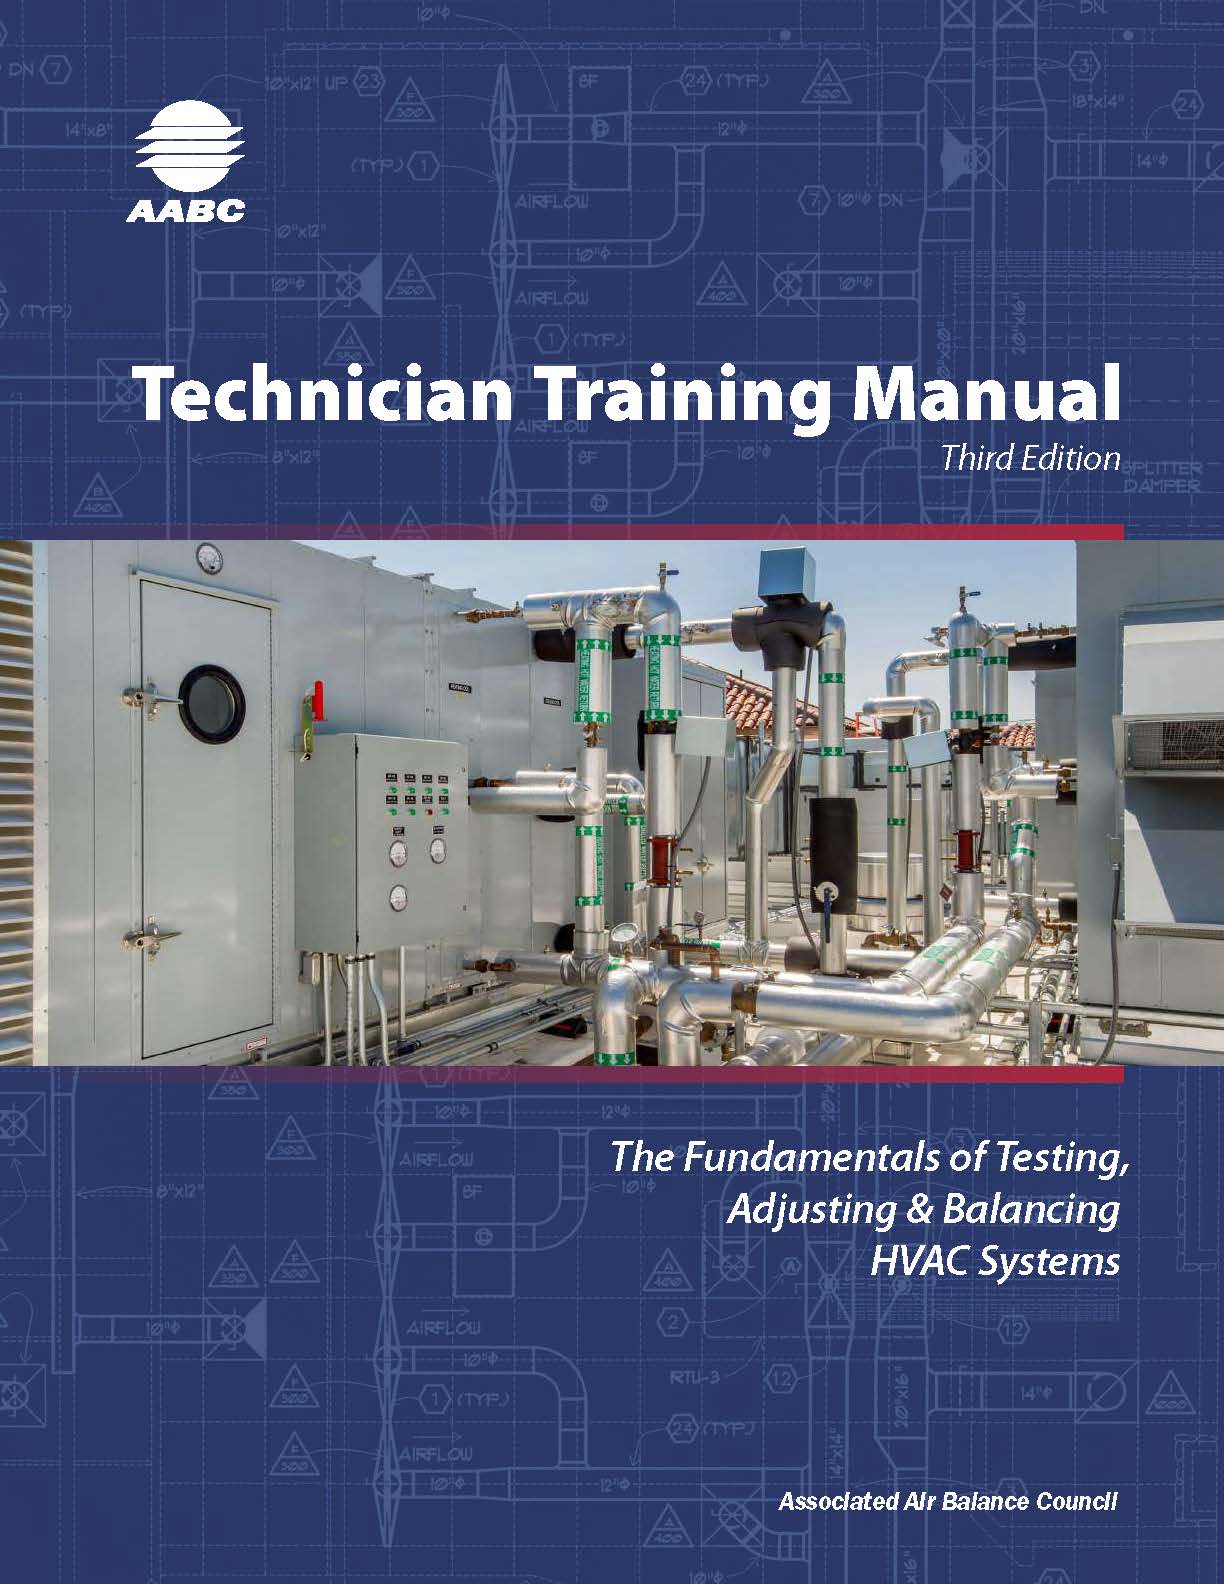 AABC-Technician Training Manual_3rd Edition cover